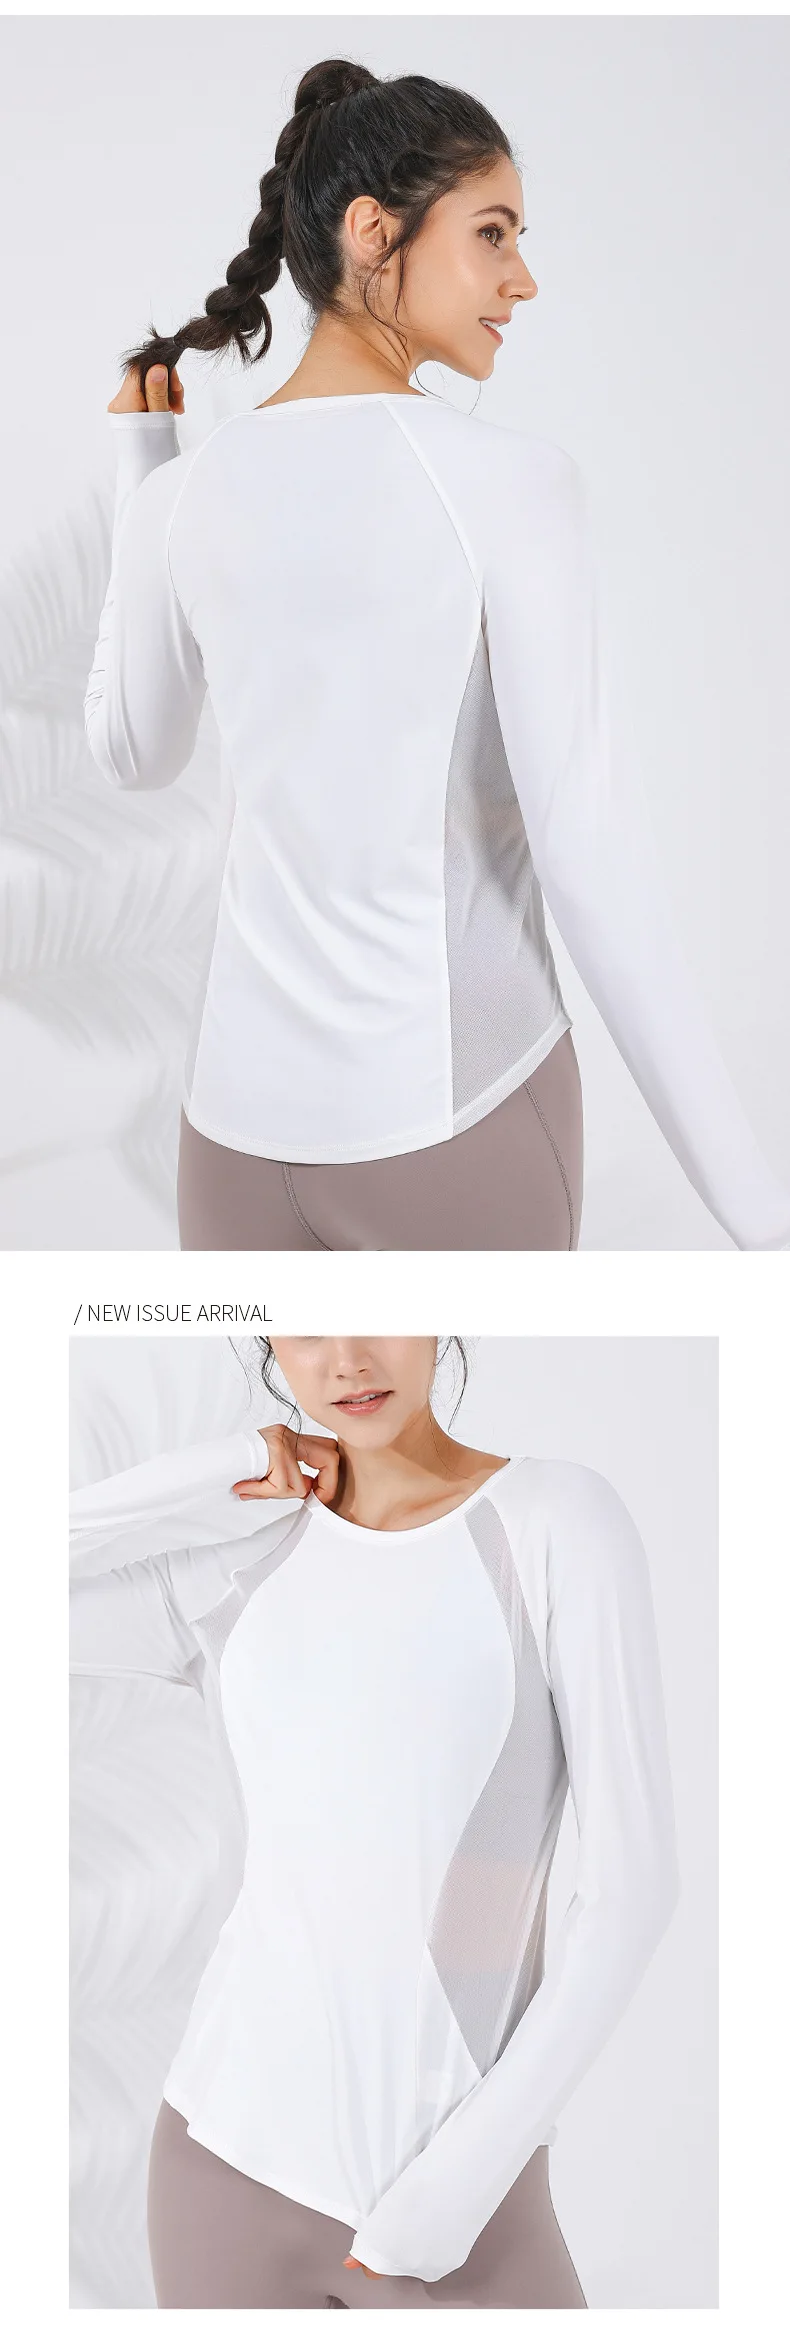 Wholesale Top Quality Women Long Sleeve Compression Workout Shirts Mesh ...